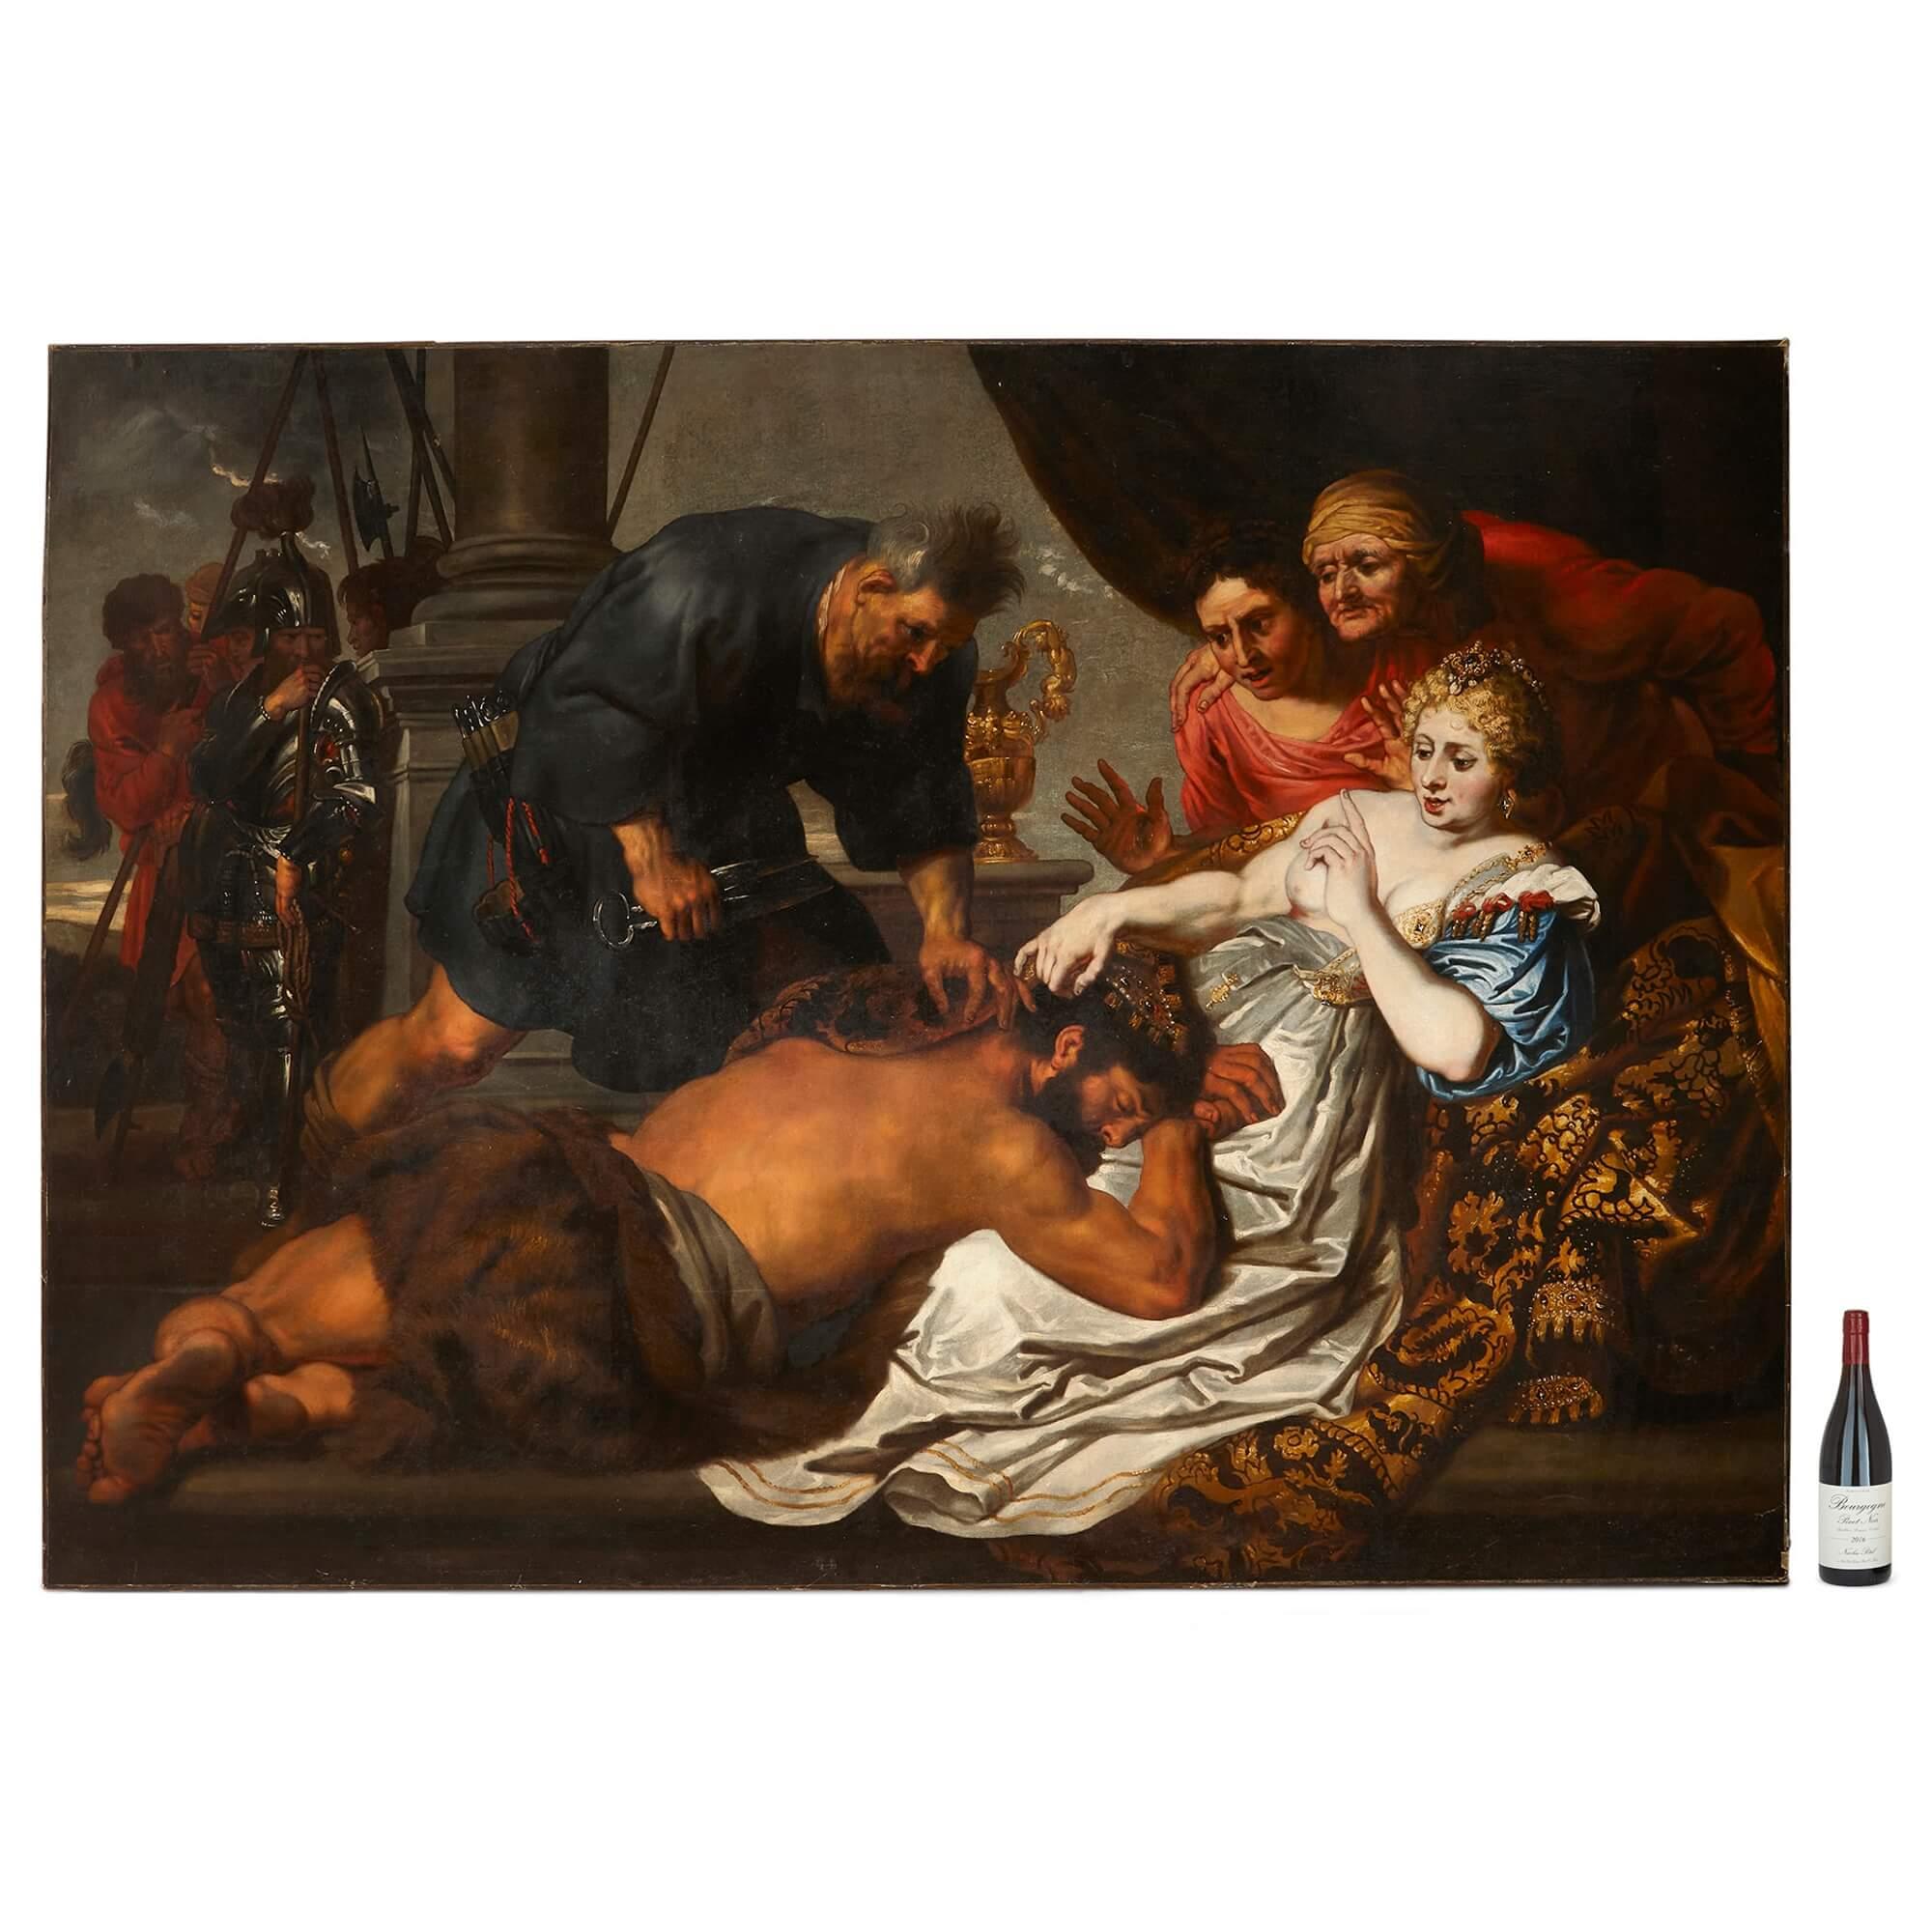 Large antique oil painting of Samson and Delilah after Anthony van Dyck   
Dutch, 17th Century  
Height 165cm, width 233cm 

This very large artwork is modeled after Anthony van Dyck’s (1599-1641) oil painting of Samson and Delilah dated to c. 1620.